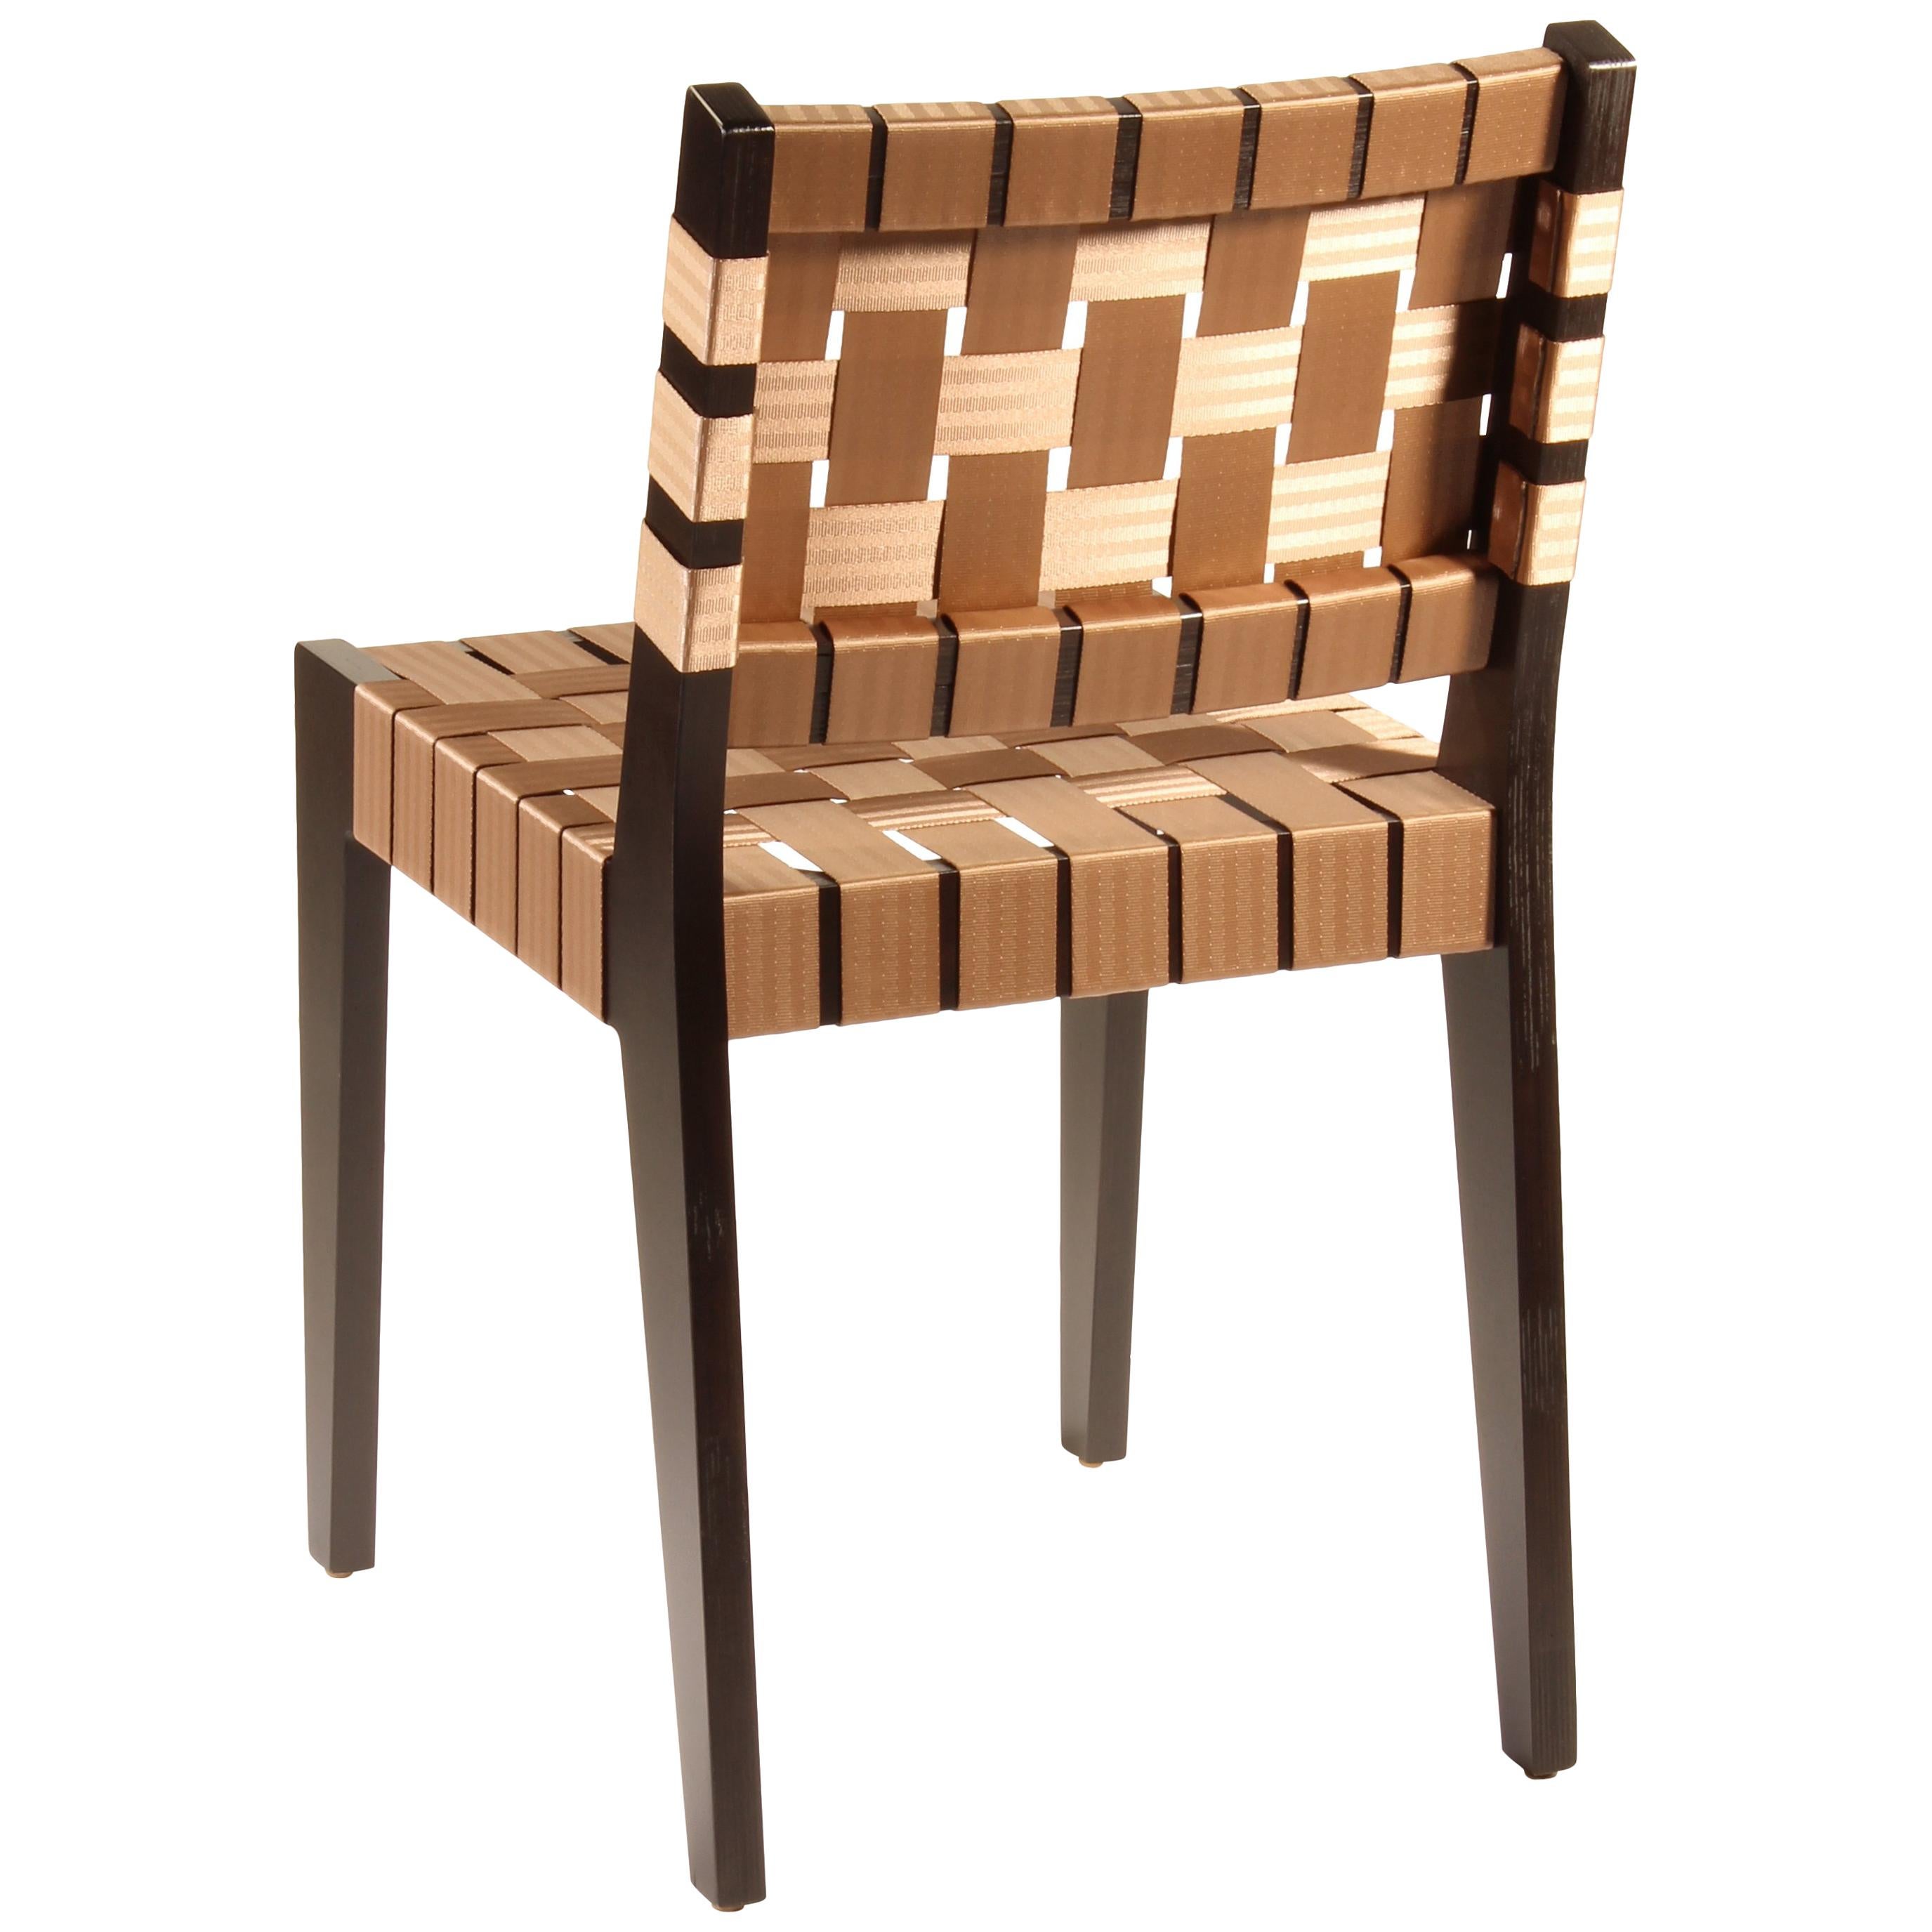 Maple Side Chair In Wenge with Champagne Woven Seat & Back by Peter Danko For Sale